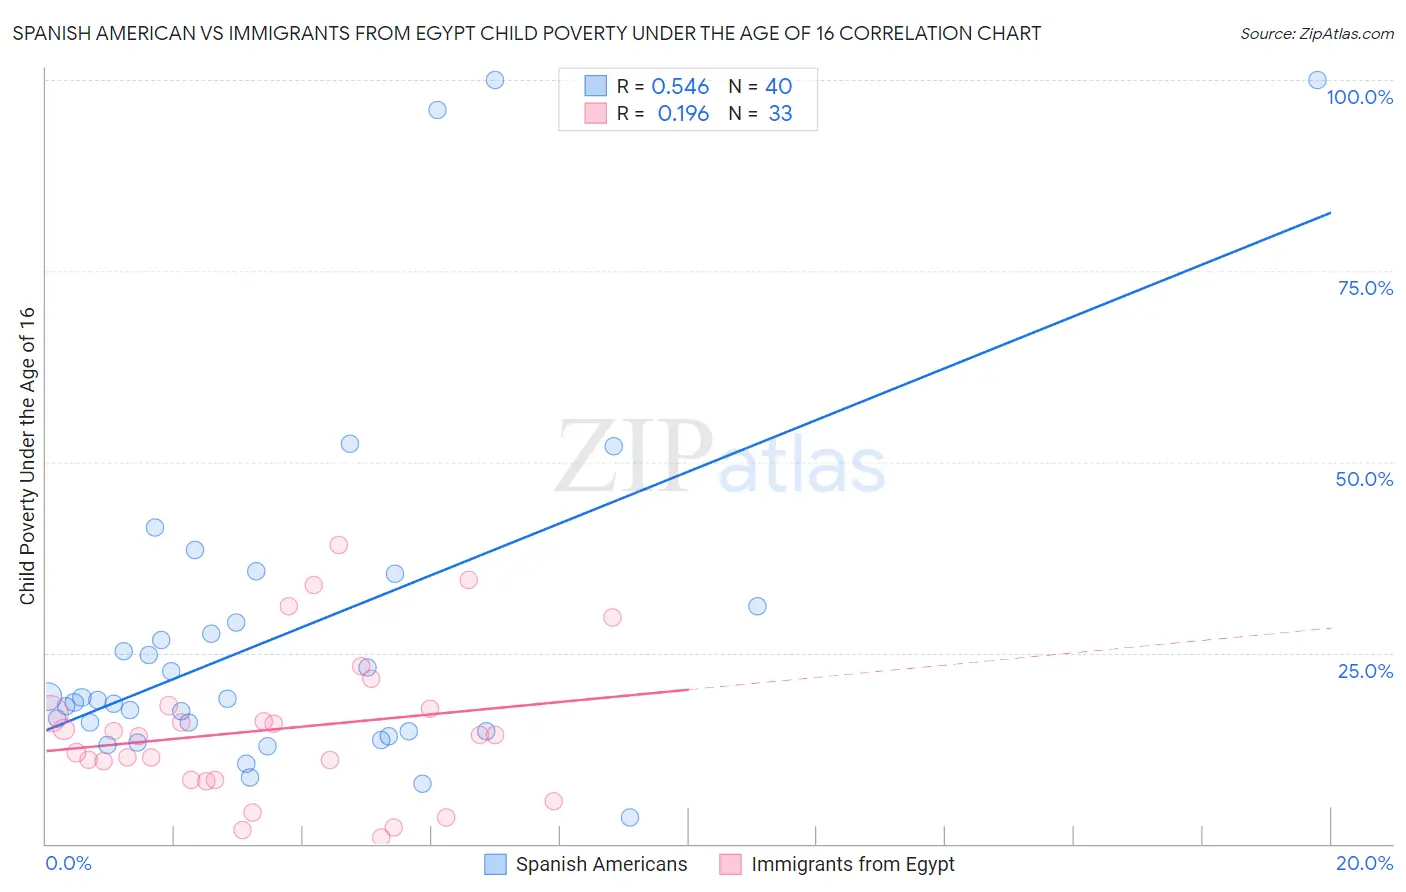 Spanish American vs Immigrants from Egypt Child Poverty Under the Age of 16